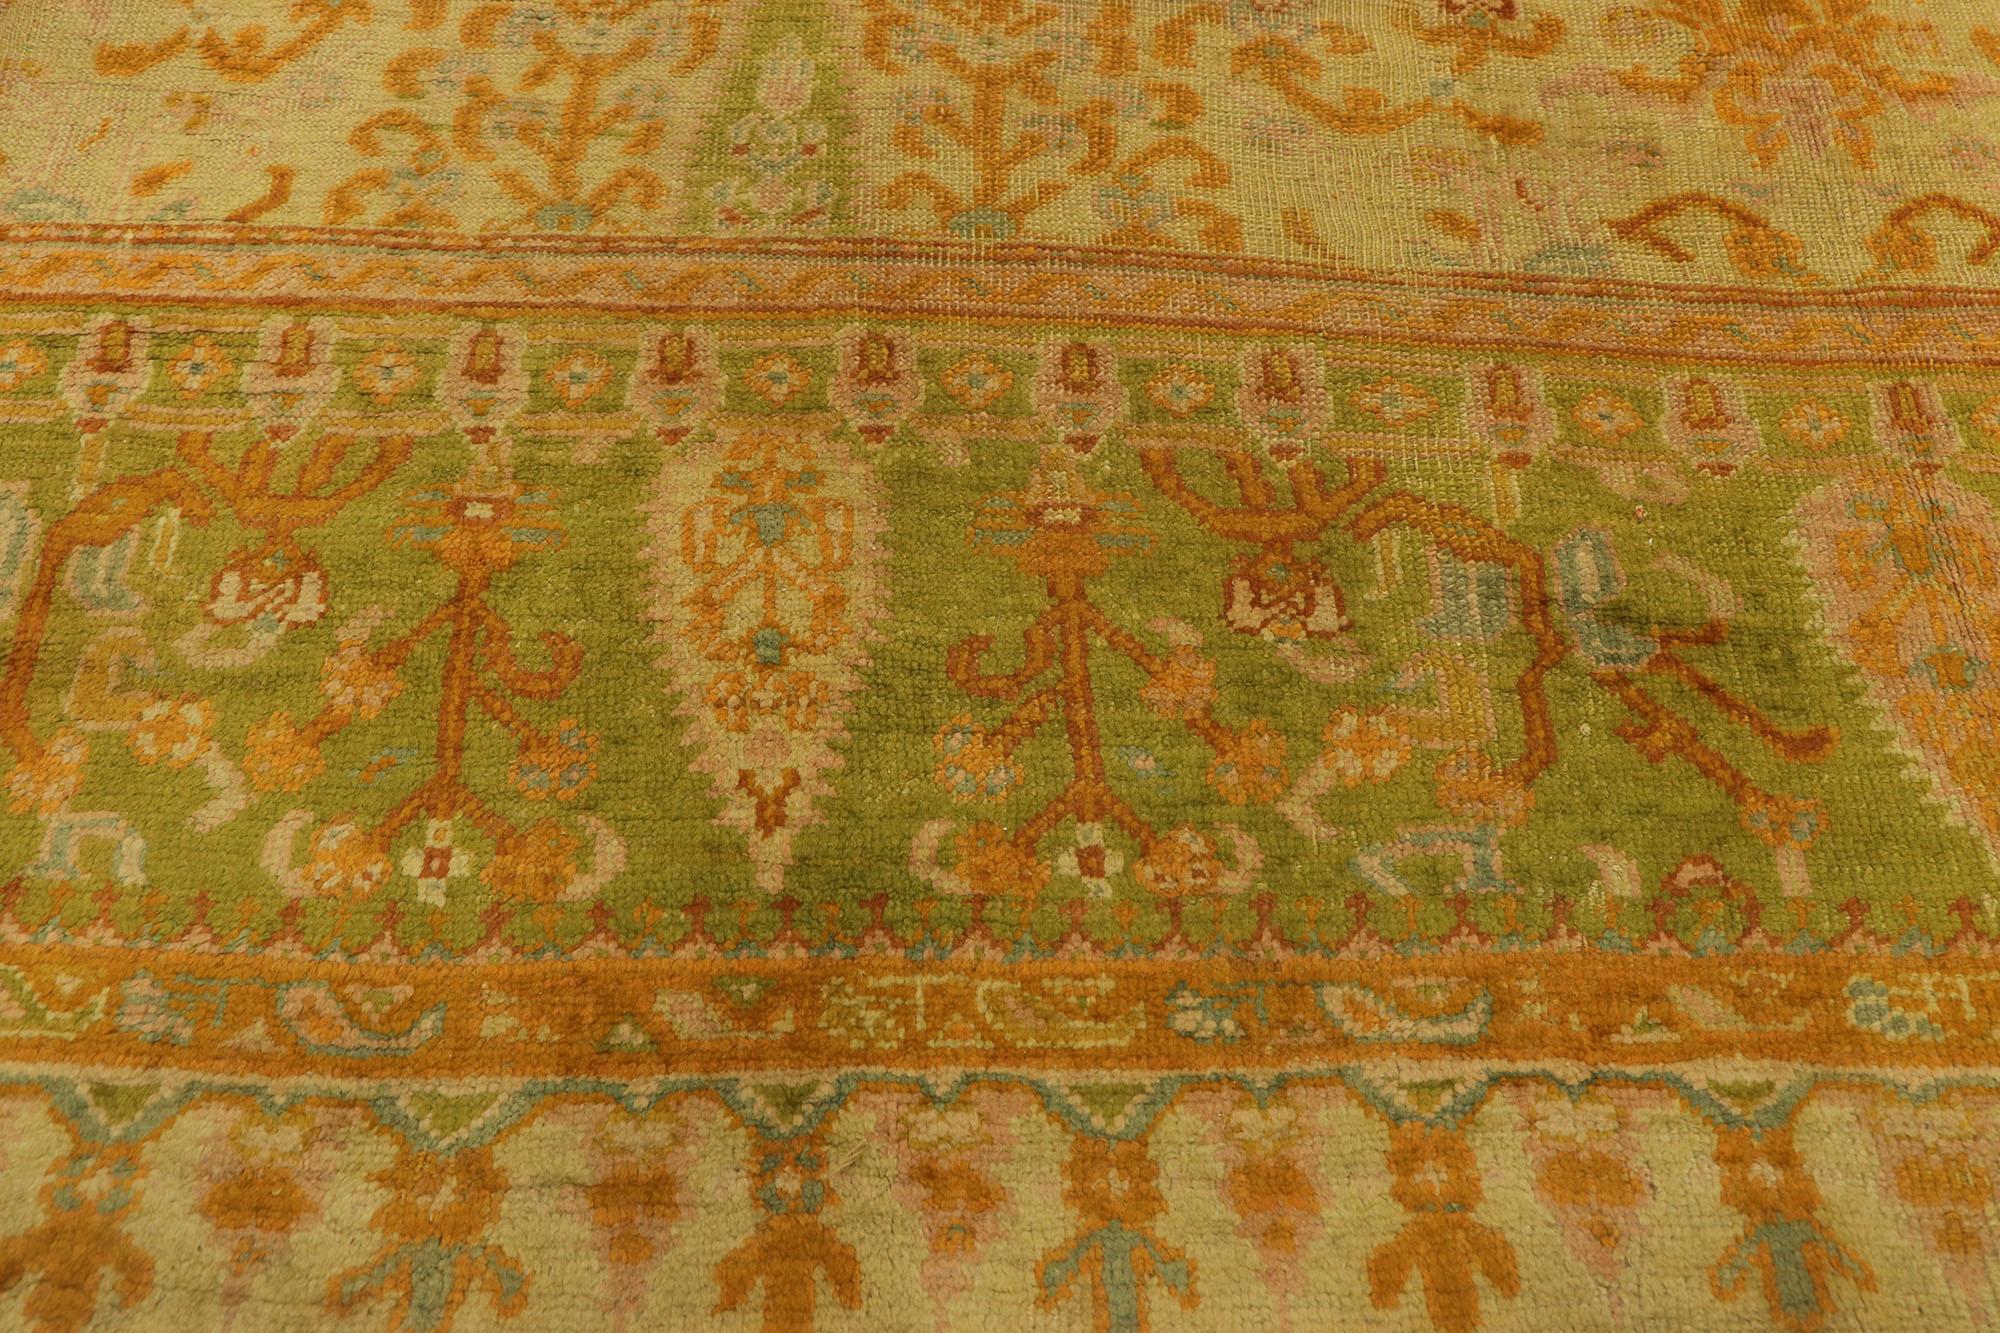 19th Century 1890s Antique Turkish Oushak Rug, Italian Nonna Chic Meets Maximalist Style For Sale